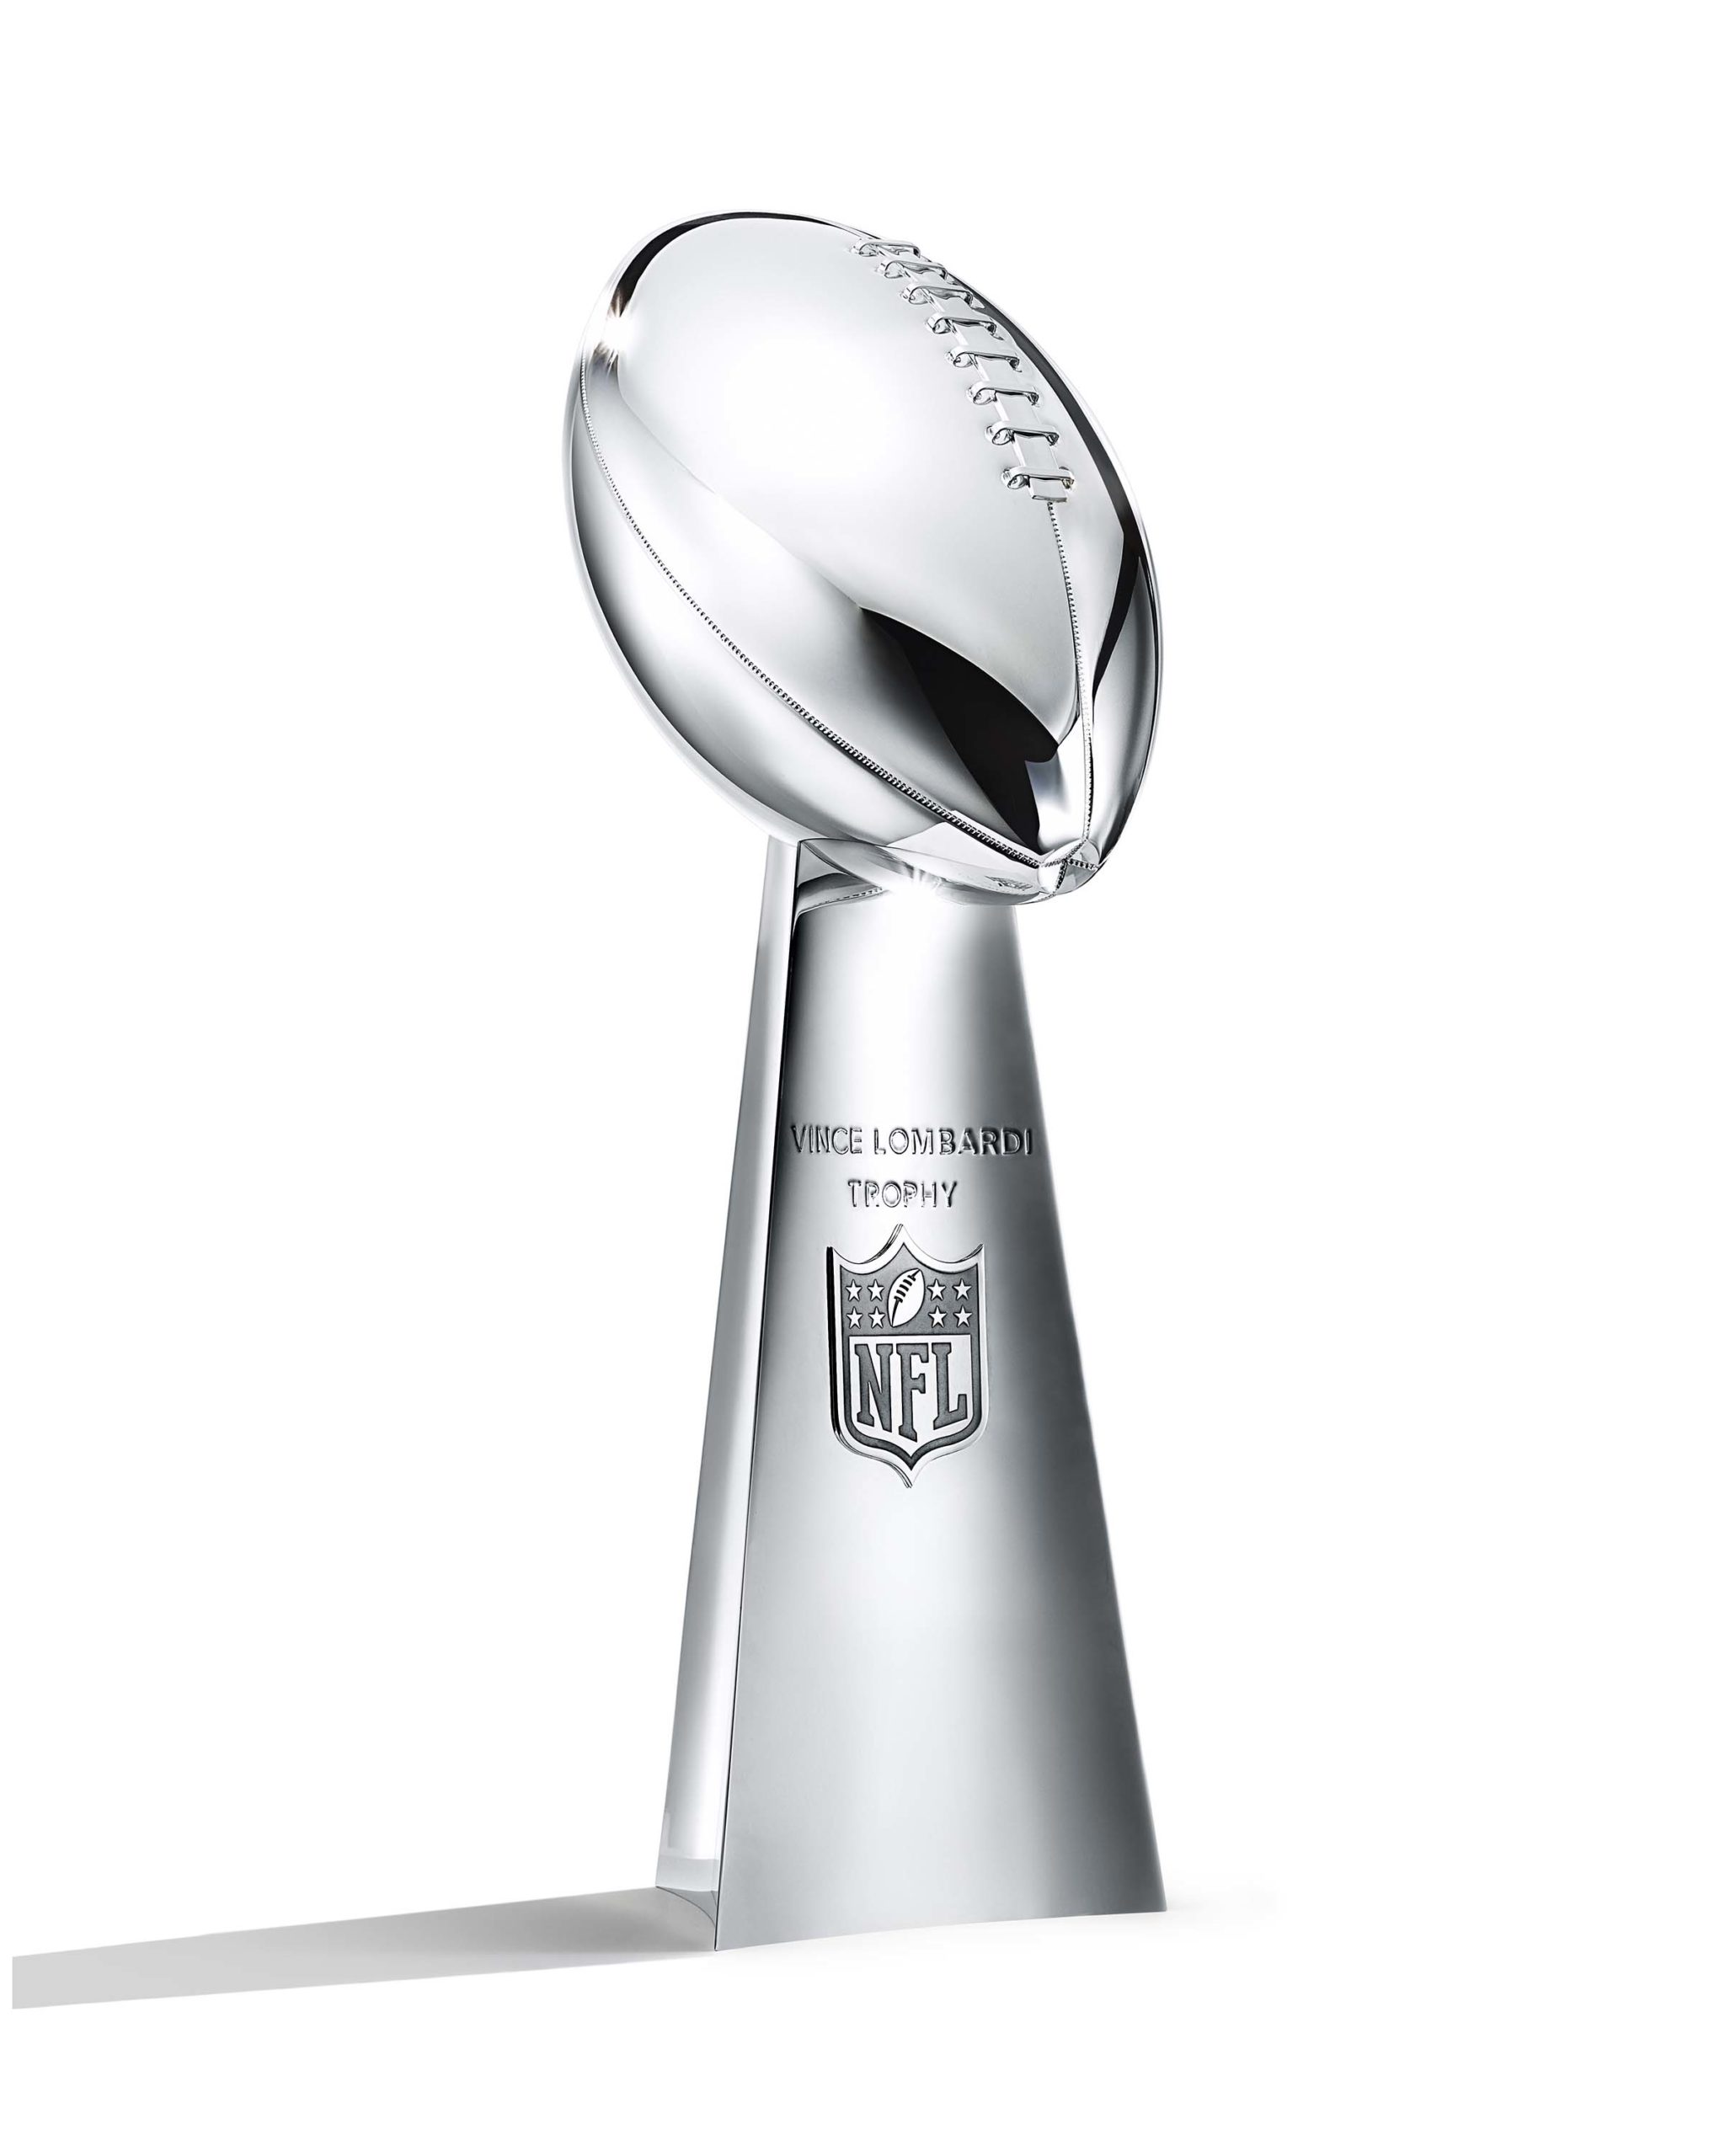 The Vince Lombardi Trophy®. Designed and handcrafted by Tiffany & Co